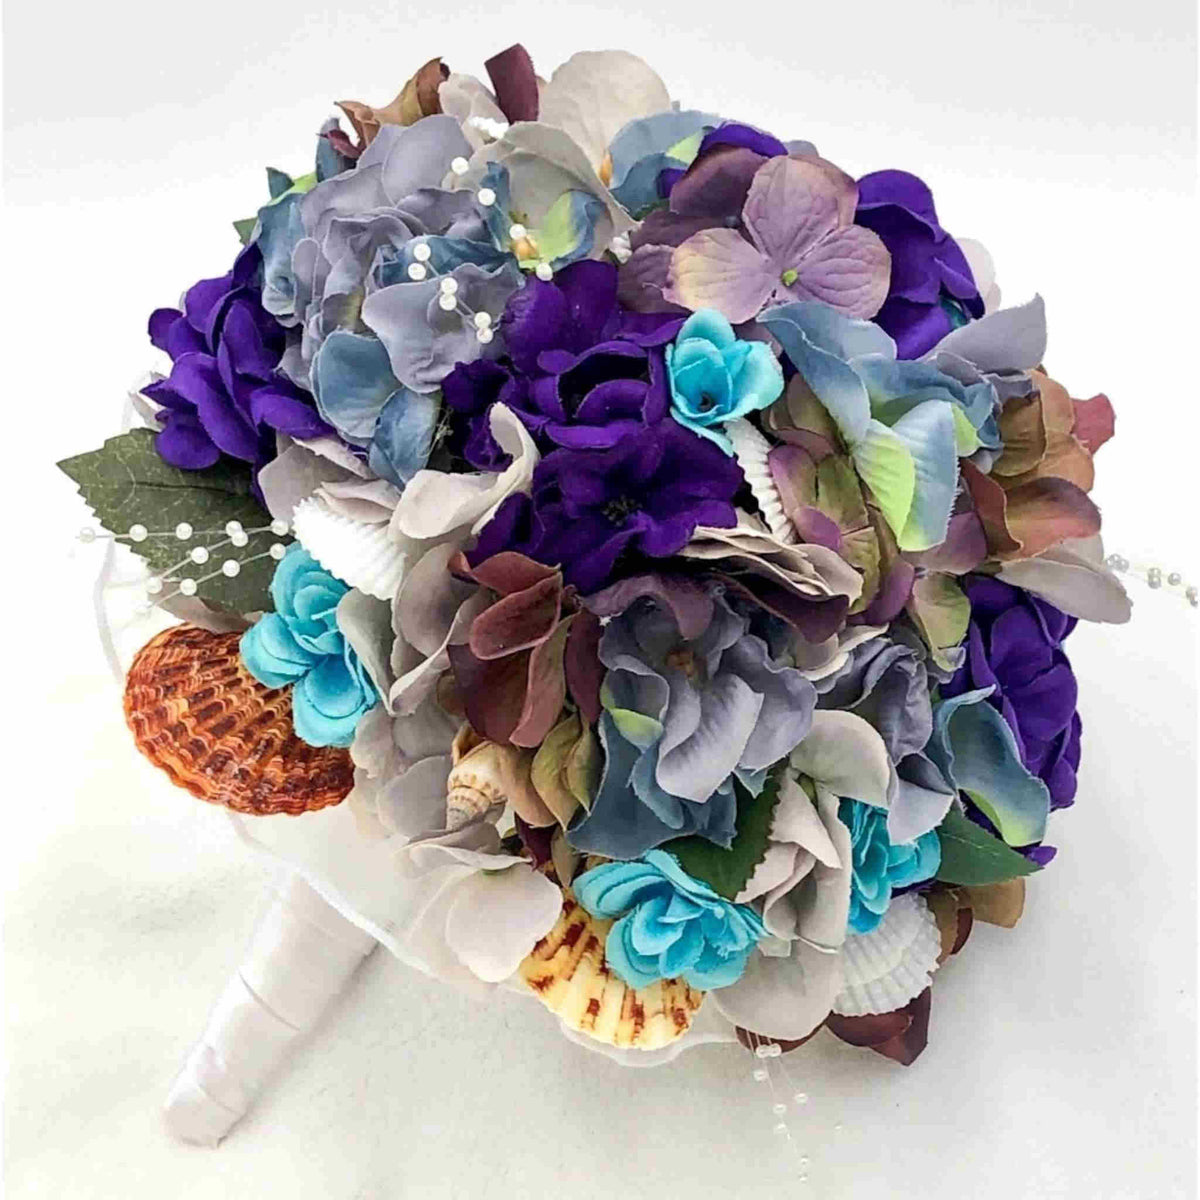 Made with purple and turquoise flowers, accented with seashells and white pearl stems, this beautiful bouquet sits atop a handle with a comfort grip wrapped in white satin with teal accent ribbon.